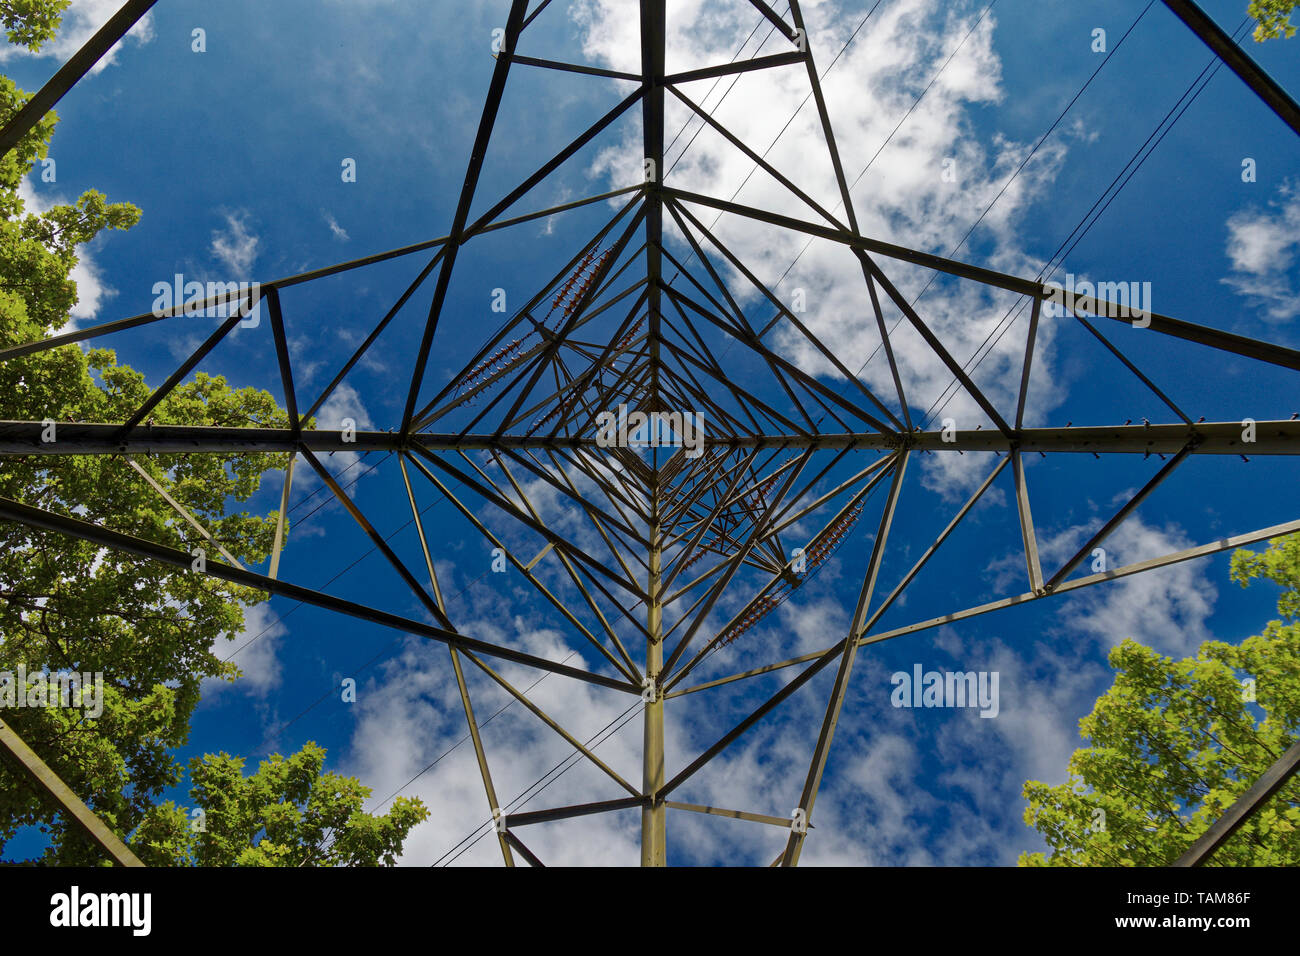 Looking up from directly underneath an electricity pylon or transmission tower Stock Photo